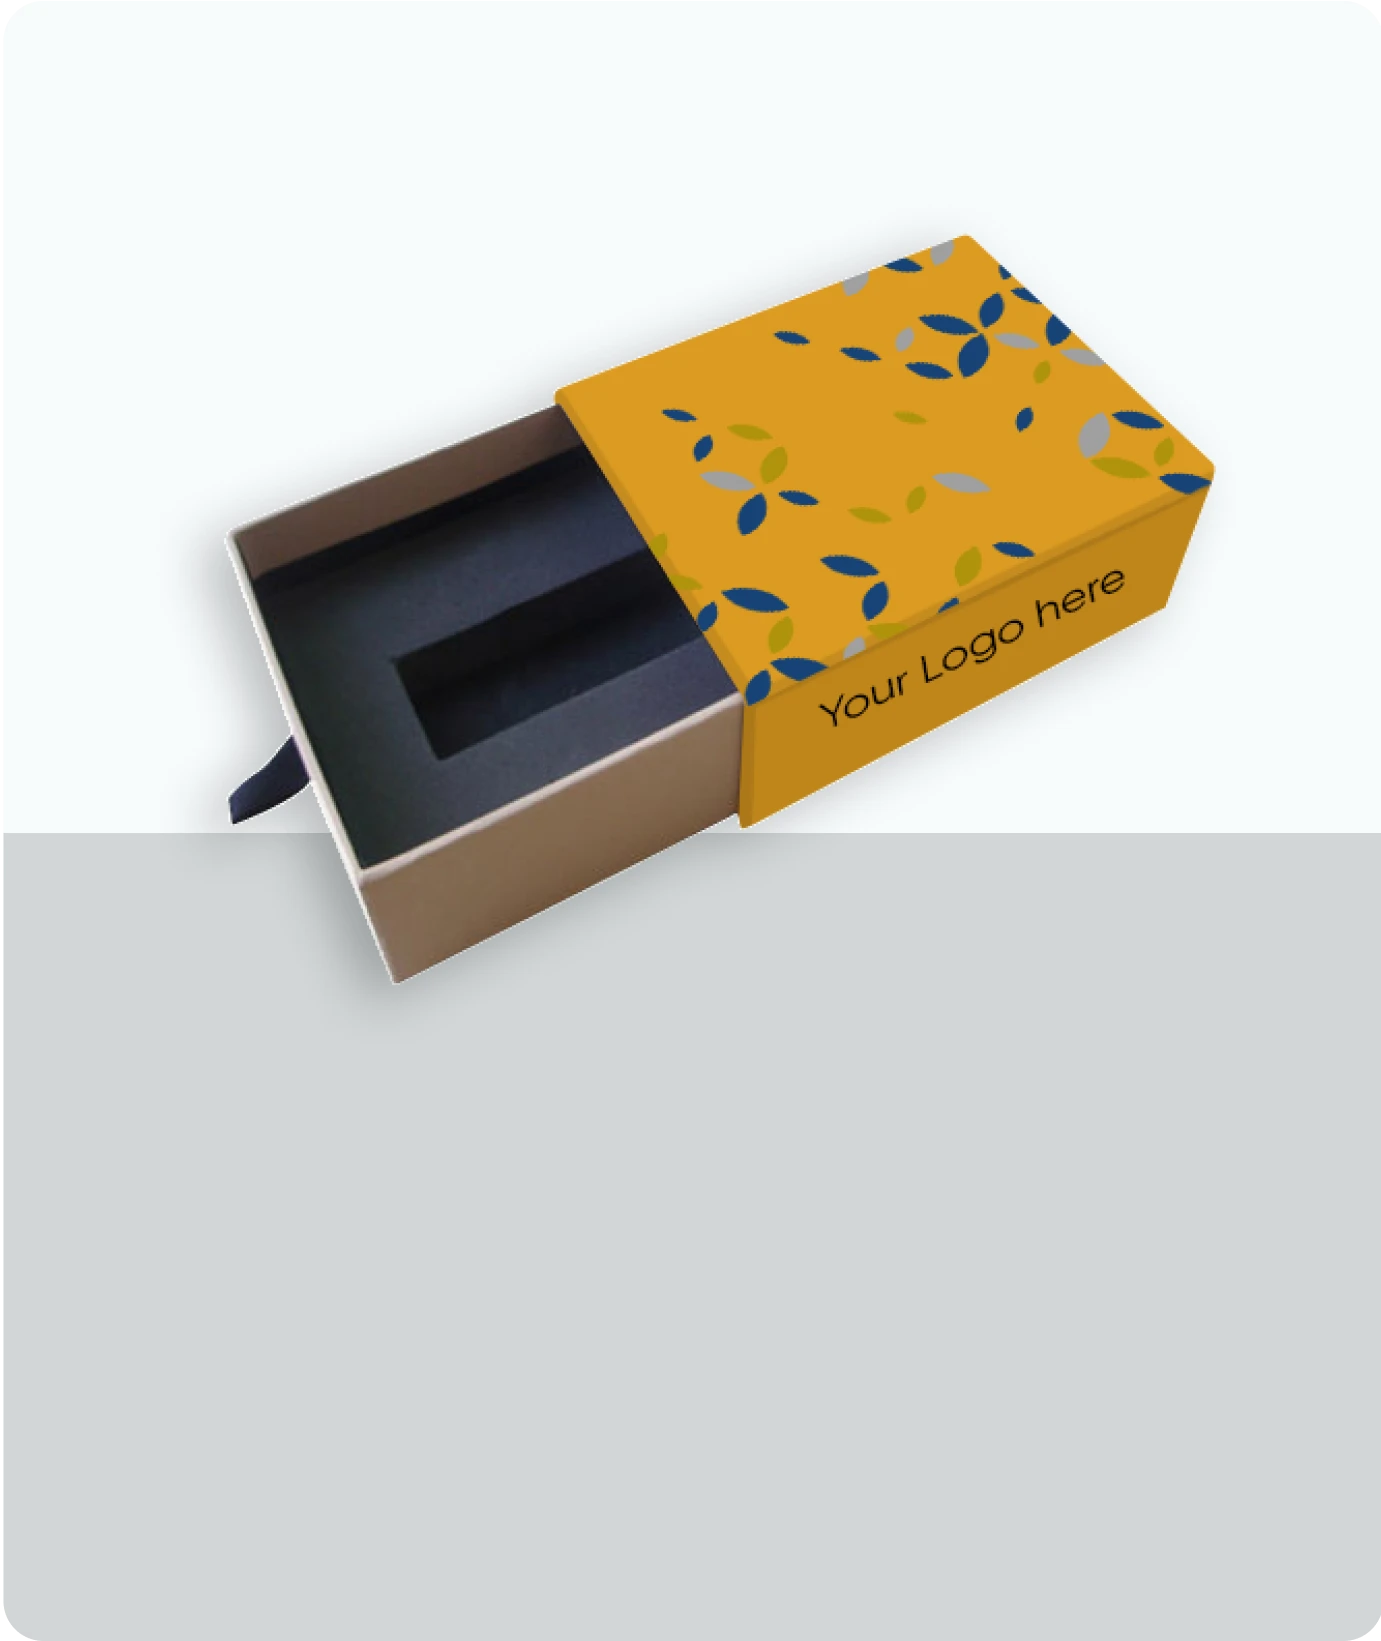 Tray and Sleeve Boxes With Inserts related products image | The Box Lane